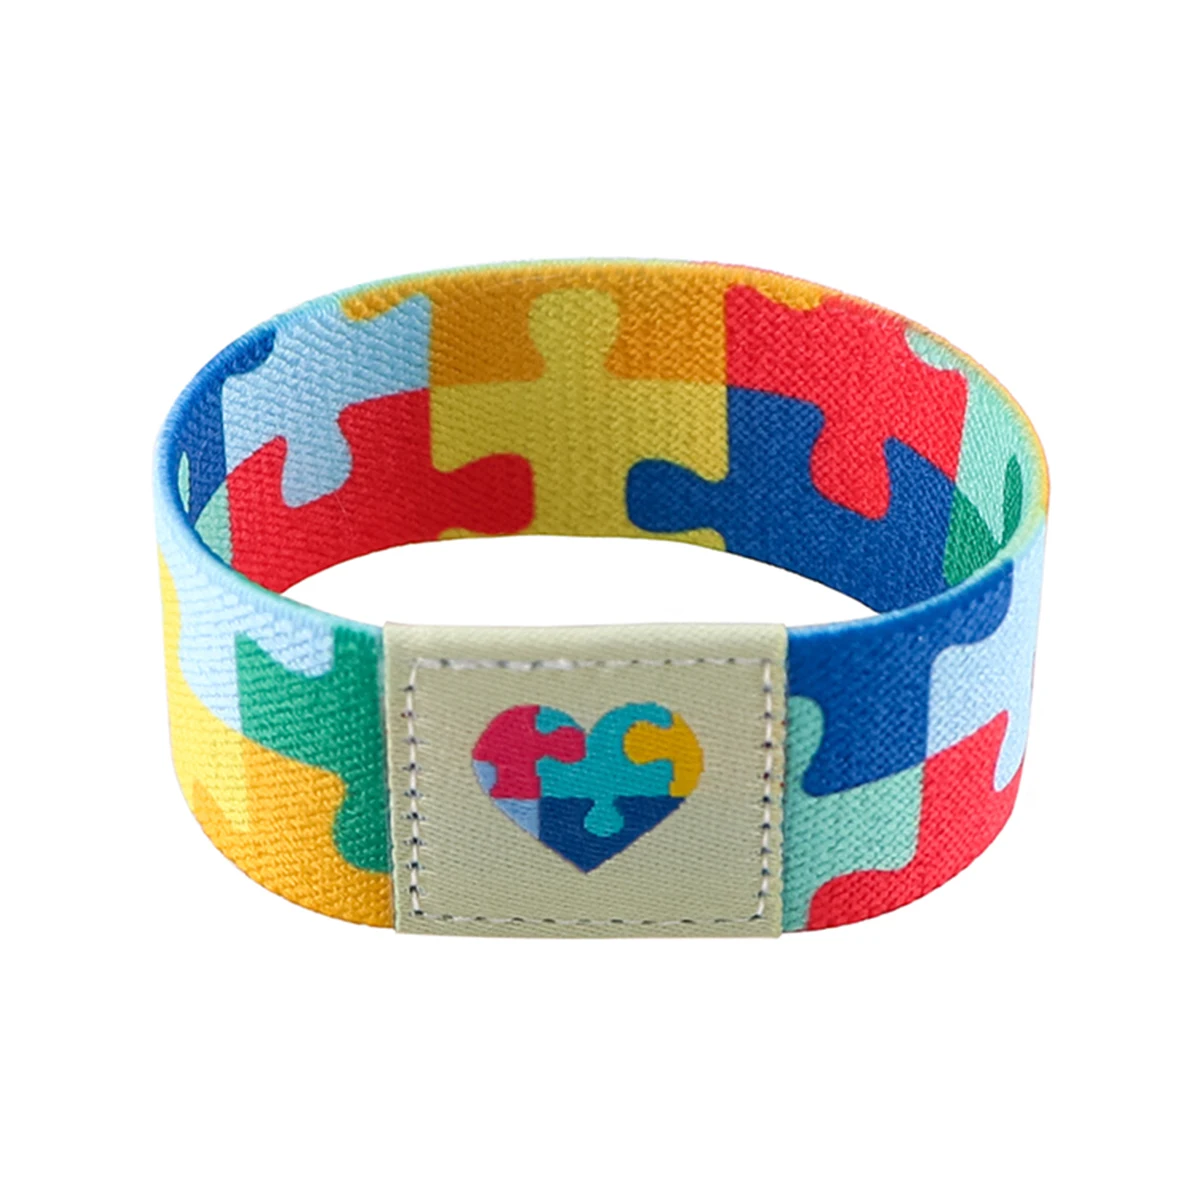 

Autism Awareness Stretch Wristband Bracelet Flexible Wrist Band Cuff Bracelet Sports Casual Bangle For Collection Gifts